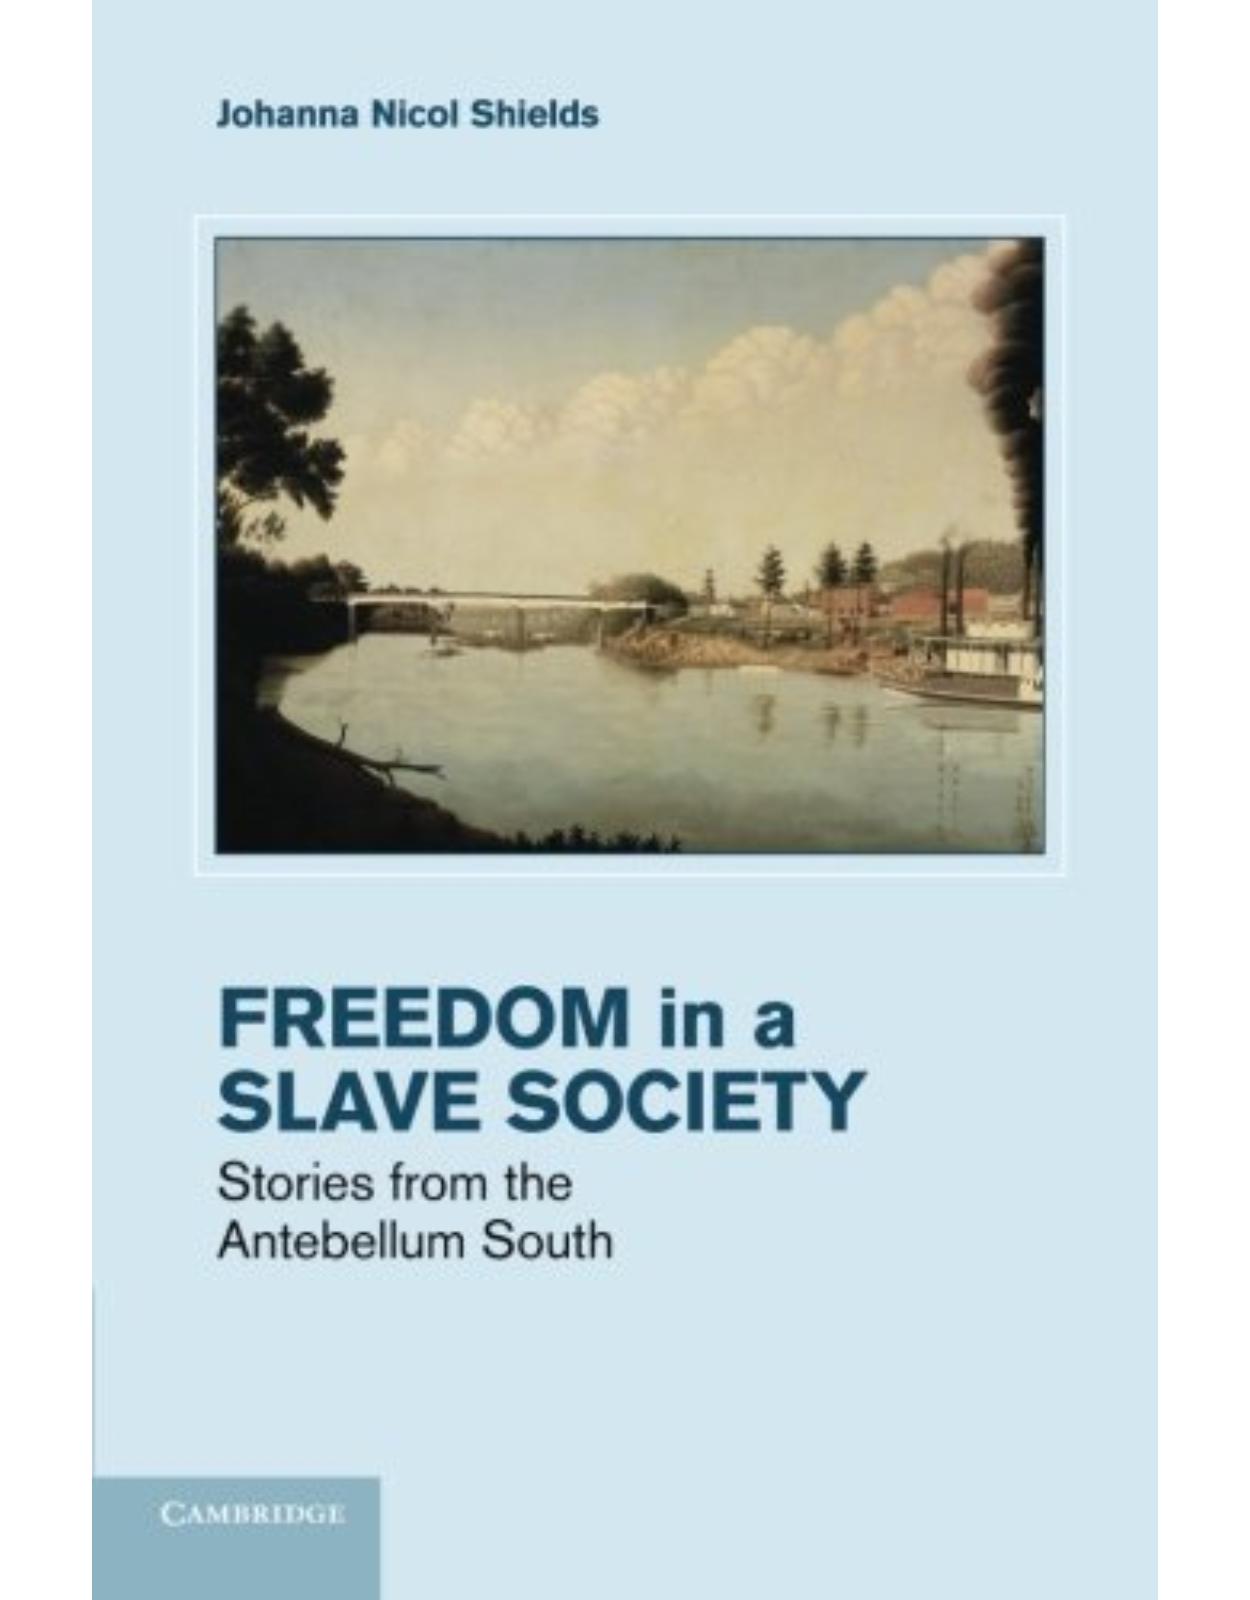 Freedom in a Slave Society: Stories from the Antebellum South (Cambridge Studies on the American South)